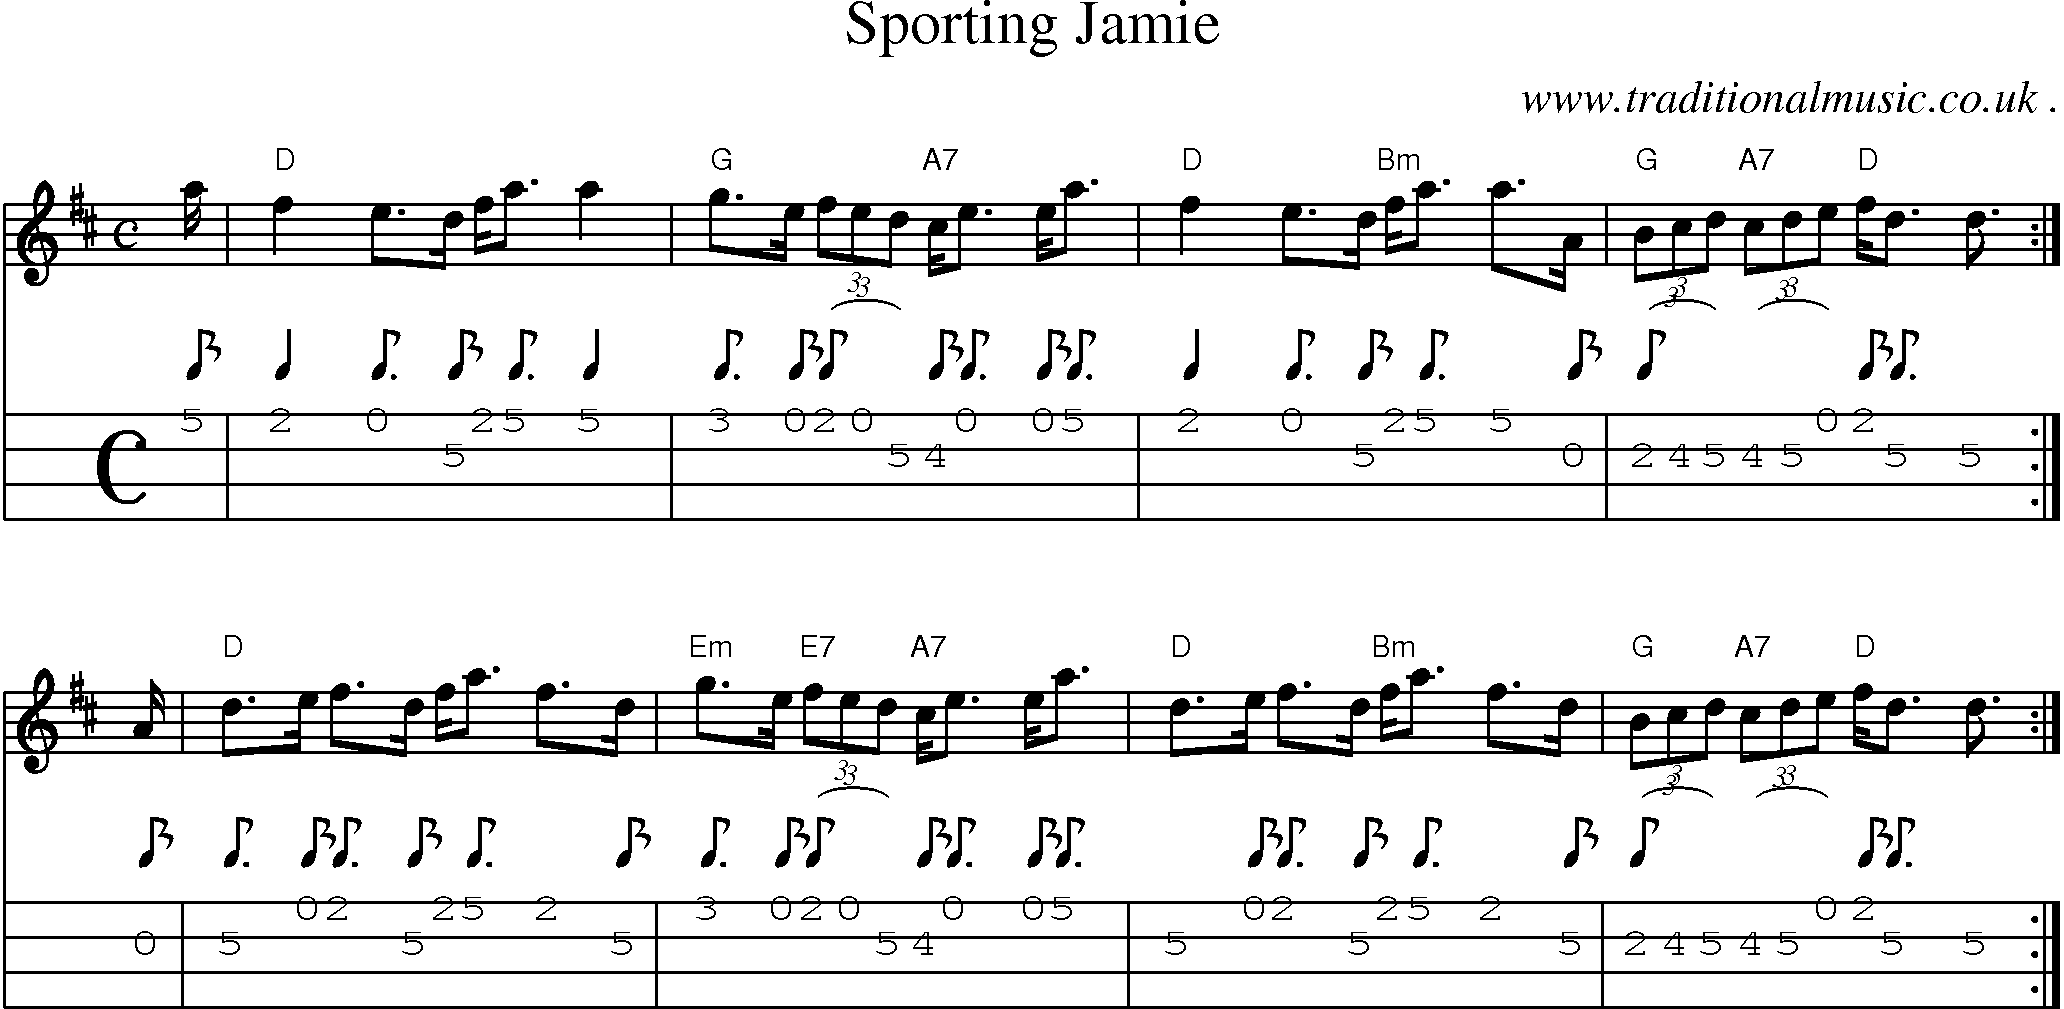 Sheet-music  score, Chords and Mandolin Tabs for Sporting Jamie